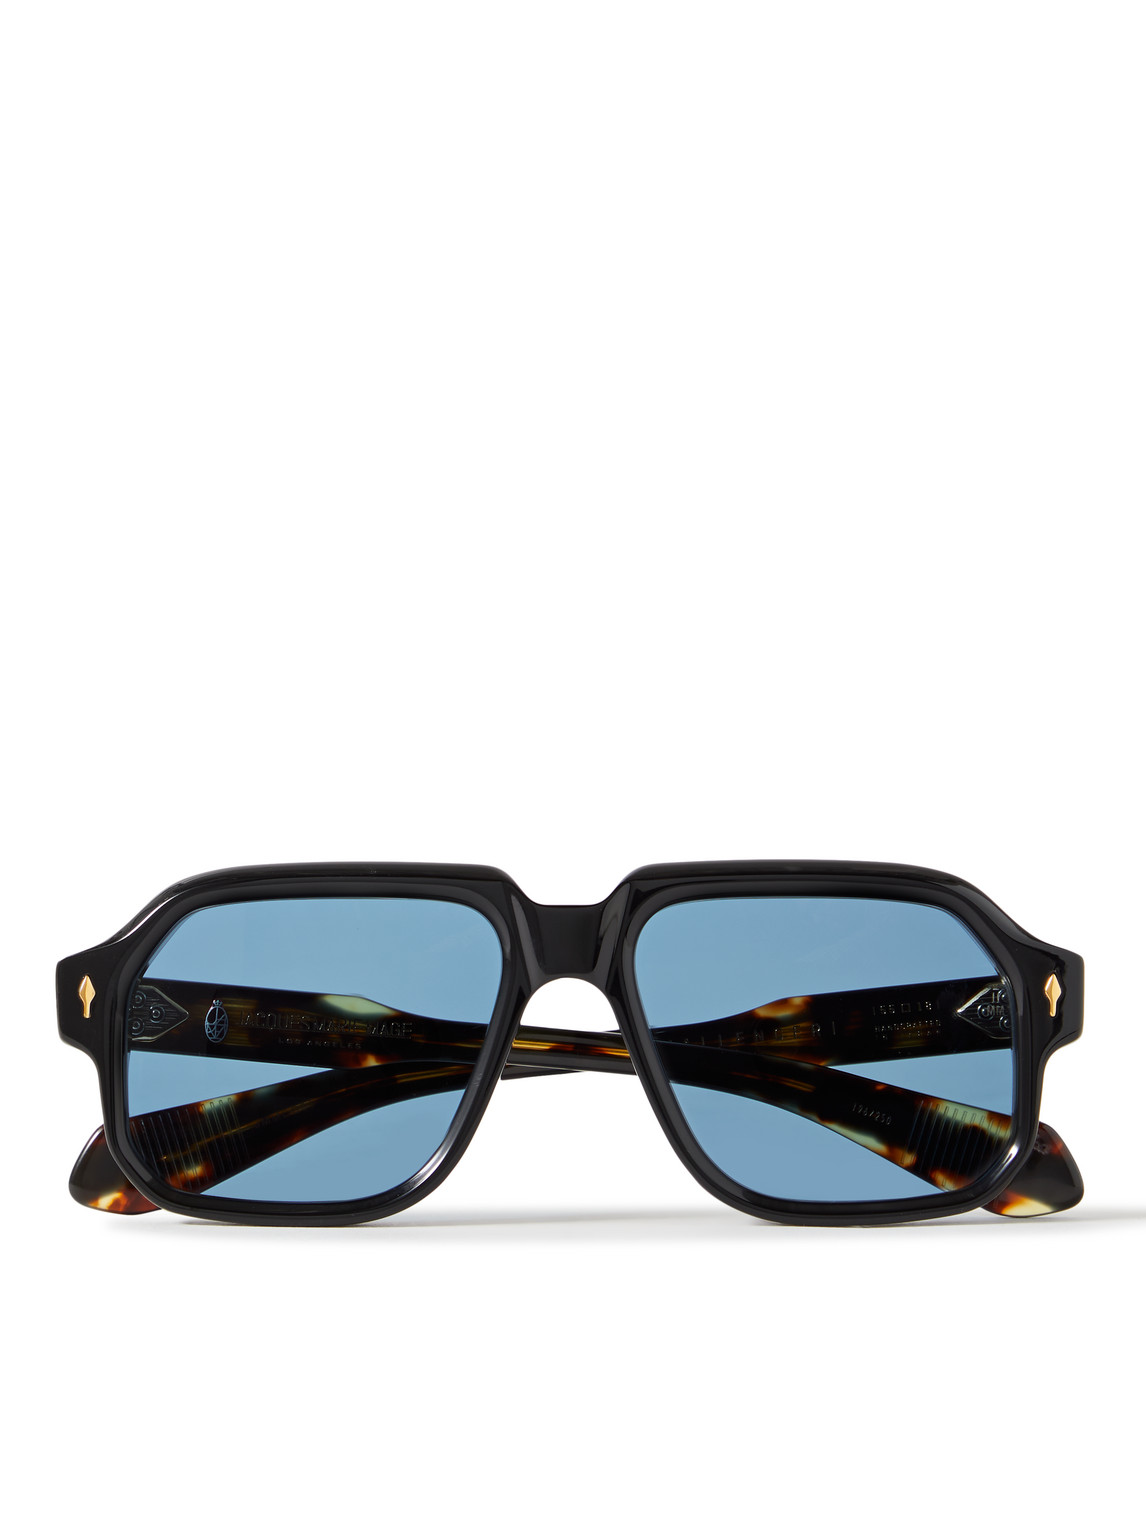 Jacques Marie Mage Challenger Square-frame Tortoiseshell Acetate Sunglasses In Black